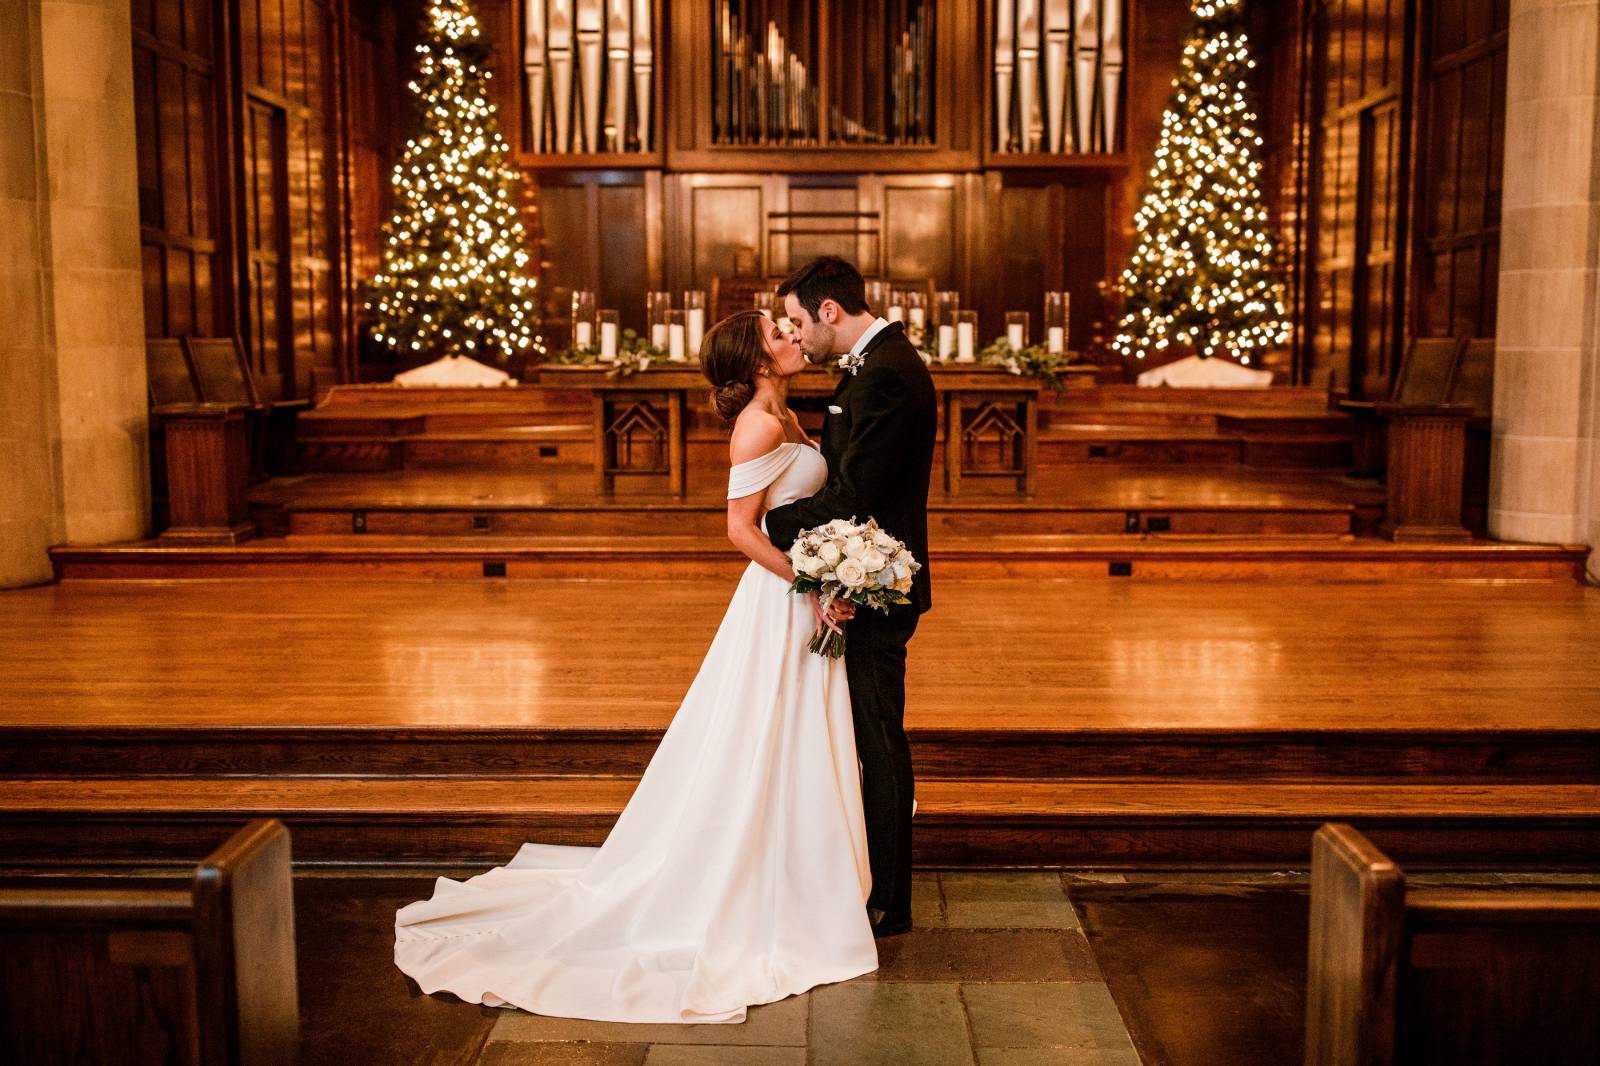 Leigh + Jeff’s Romantic Winter Wedding by John Myers Photography + Videography | Nashville